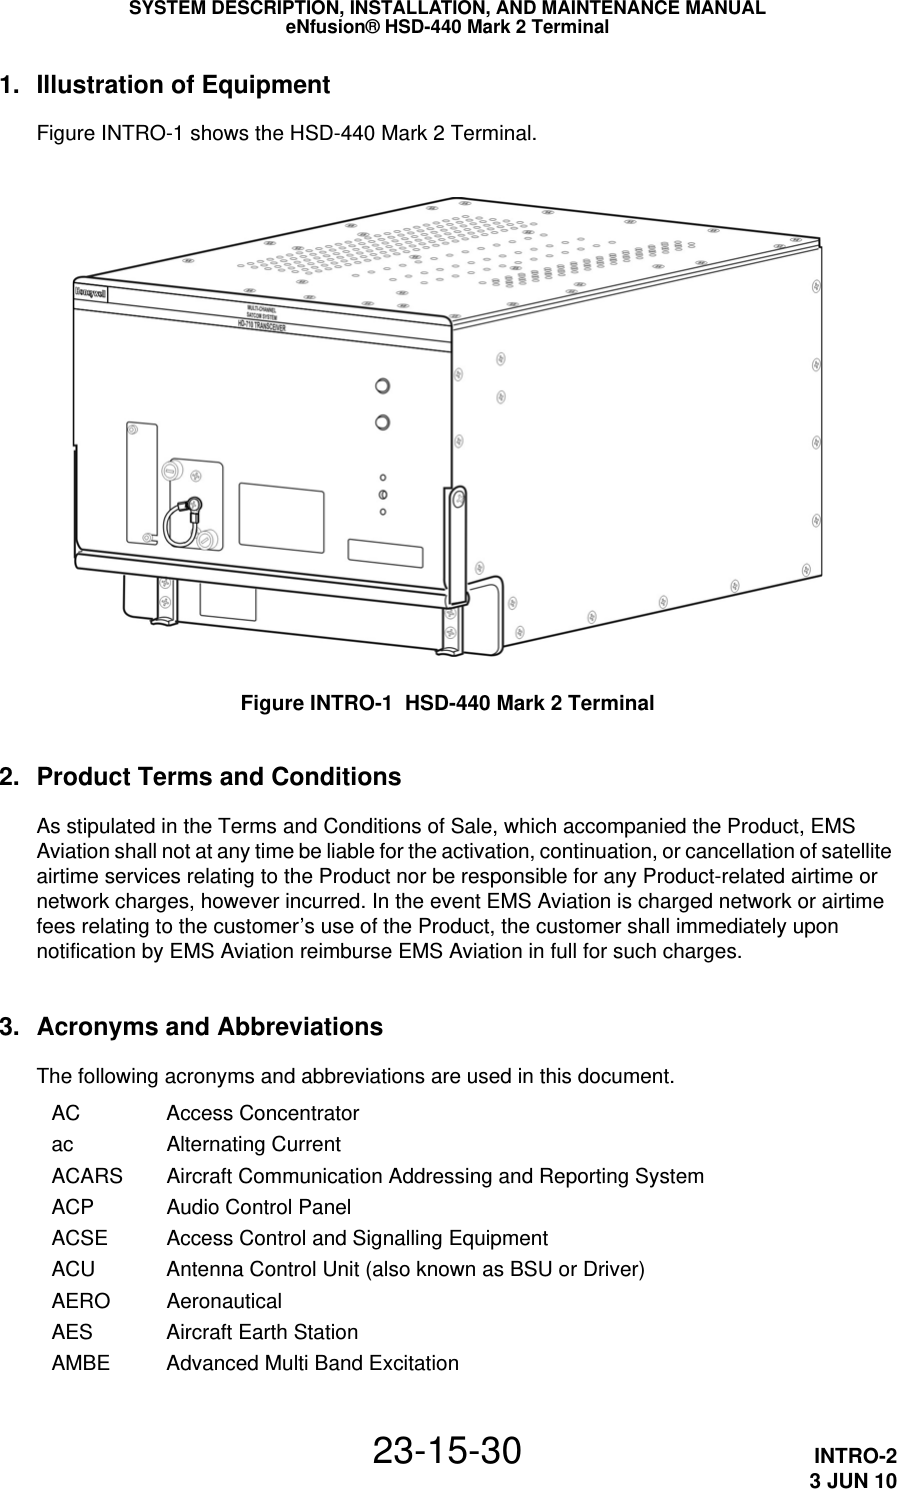 SYSTEM DESCRIPTION, INSTALLATION, AND MAINTENANCE MANUALeNfusion® HSD-440 Mark 2 Terminal23-15-30 INTRO-23 JUN 101. Illustration of EquipmentFigure INTRO-1 shows the HSD-440 Mark 2 Terminal.Figure INTRO-1  HSD-440 Mark 2 Terminal2. Product Terms and ConditionsAs stipulated in the Terms and Conditions of Sale, which accompanied the Product, EMS Aviation shall not at any time be liable for the activation, continuation, or cancellation of satellite airtime services relating to the Product nor be responsible for any Product-related airtime or network charges, however incurred. In the event EMS Aviation is charged network or airtime fees relating to the customer’s use of the Product, the customer shall immediately upon notification by EMS Aviation reimburse EMS Aviation in full for such charges.3. Acronyms and AbbreviationsThe following acronyms and abbreviations are used in this document.AC Access Concentratorac Alternating CurrentACARS Aircraft Communication Addressing and Reporting SystemACP Audio Control PanelACSE Access Control and Signalling EquipmentACU Antenna Control Unit (also known as BSU or Driver)AERO AeronauticalAES Aircraft Earth StationAMBE Advanced Multi Band Excitation